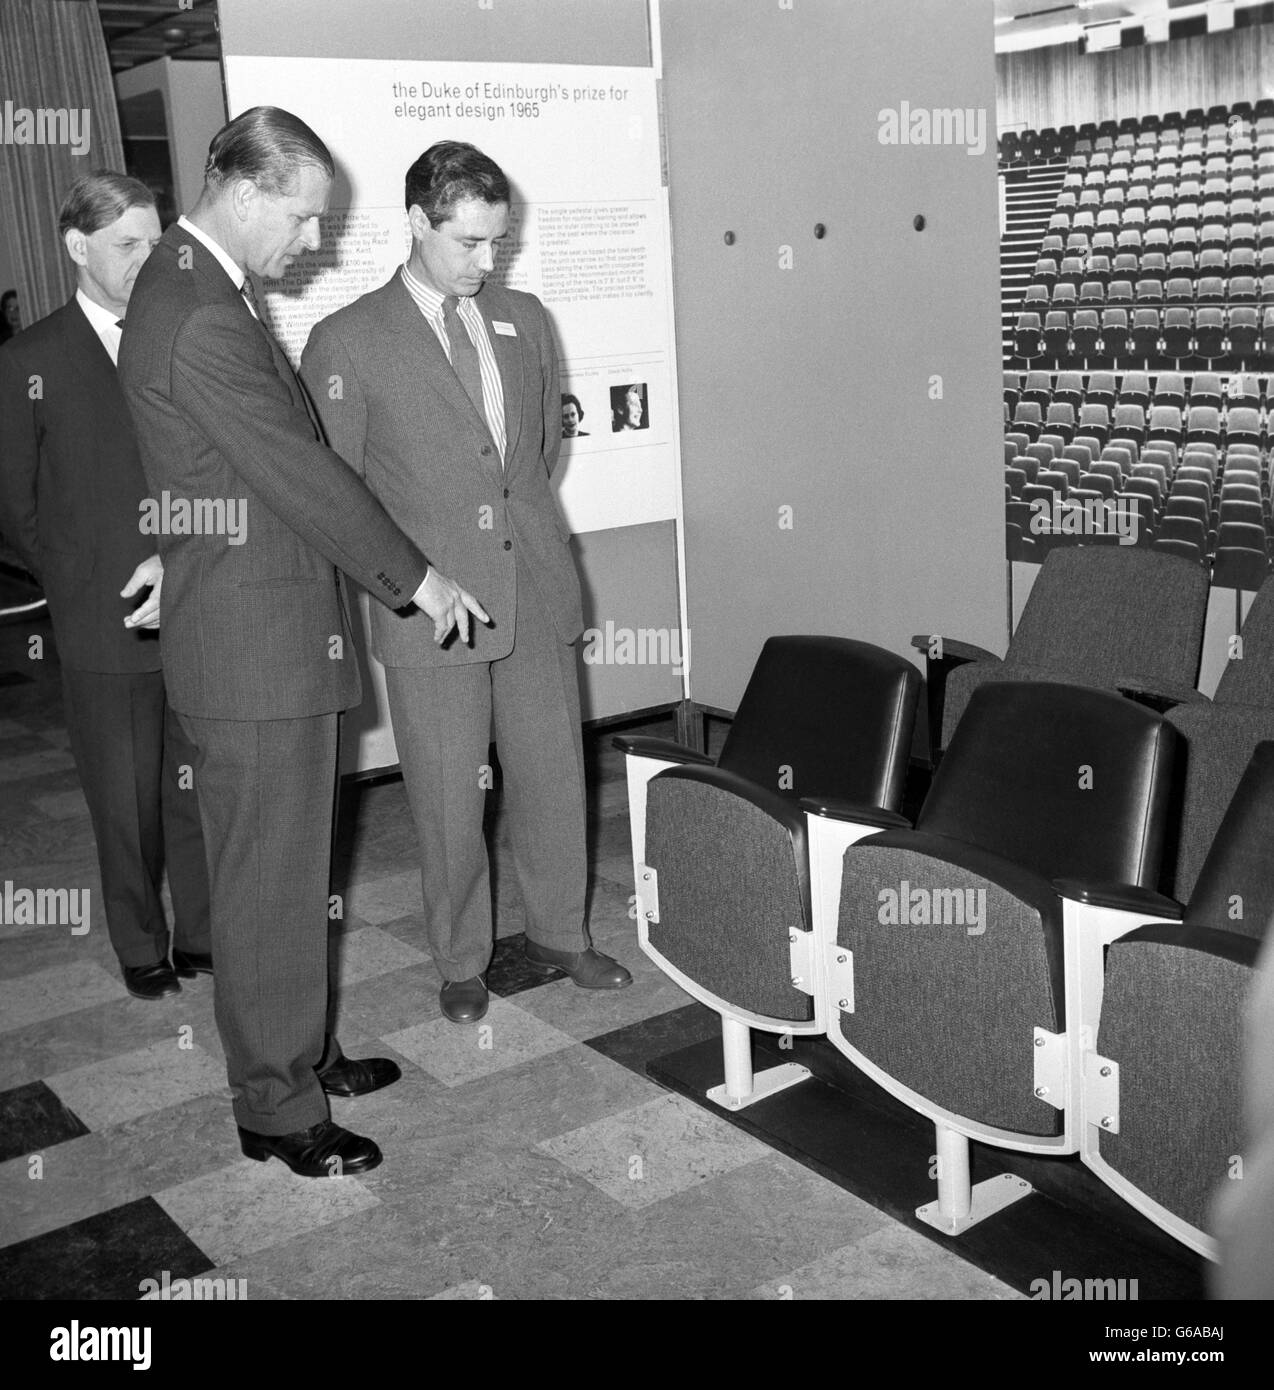 Prince Philip, The Duke of Edinburgh, pointing out features on an auditorium seat to its designer, Mr. Peter Dickinson, before the Duke presented him with his prize for Elegant Design, 1965 The auditorium seating was made by Race Contracts Ltd. Stock Photo